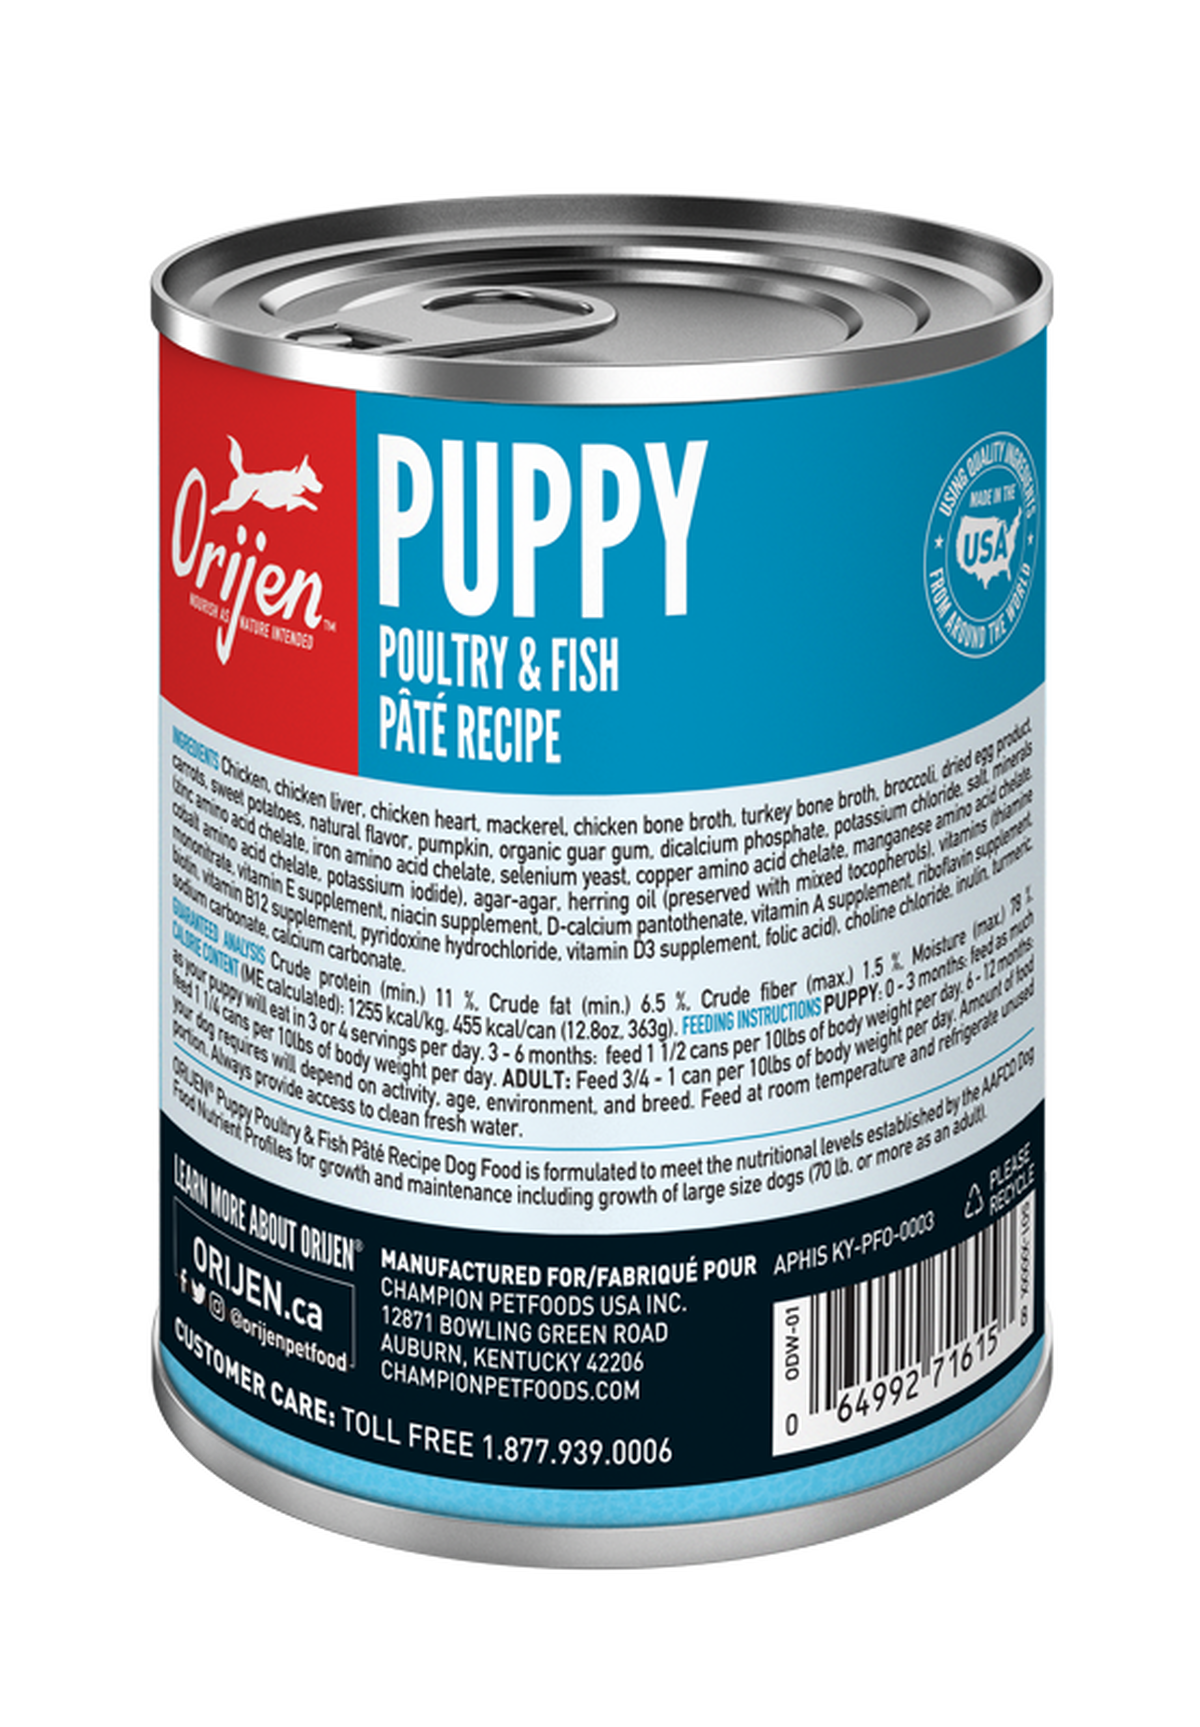 Puppy Poultry & Fish Pate 12.8oz